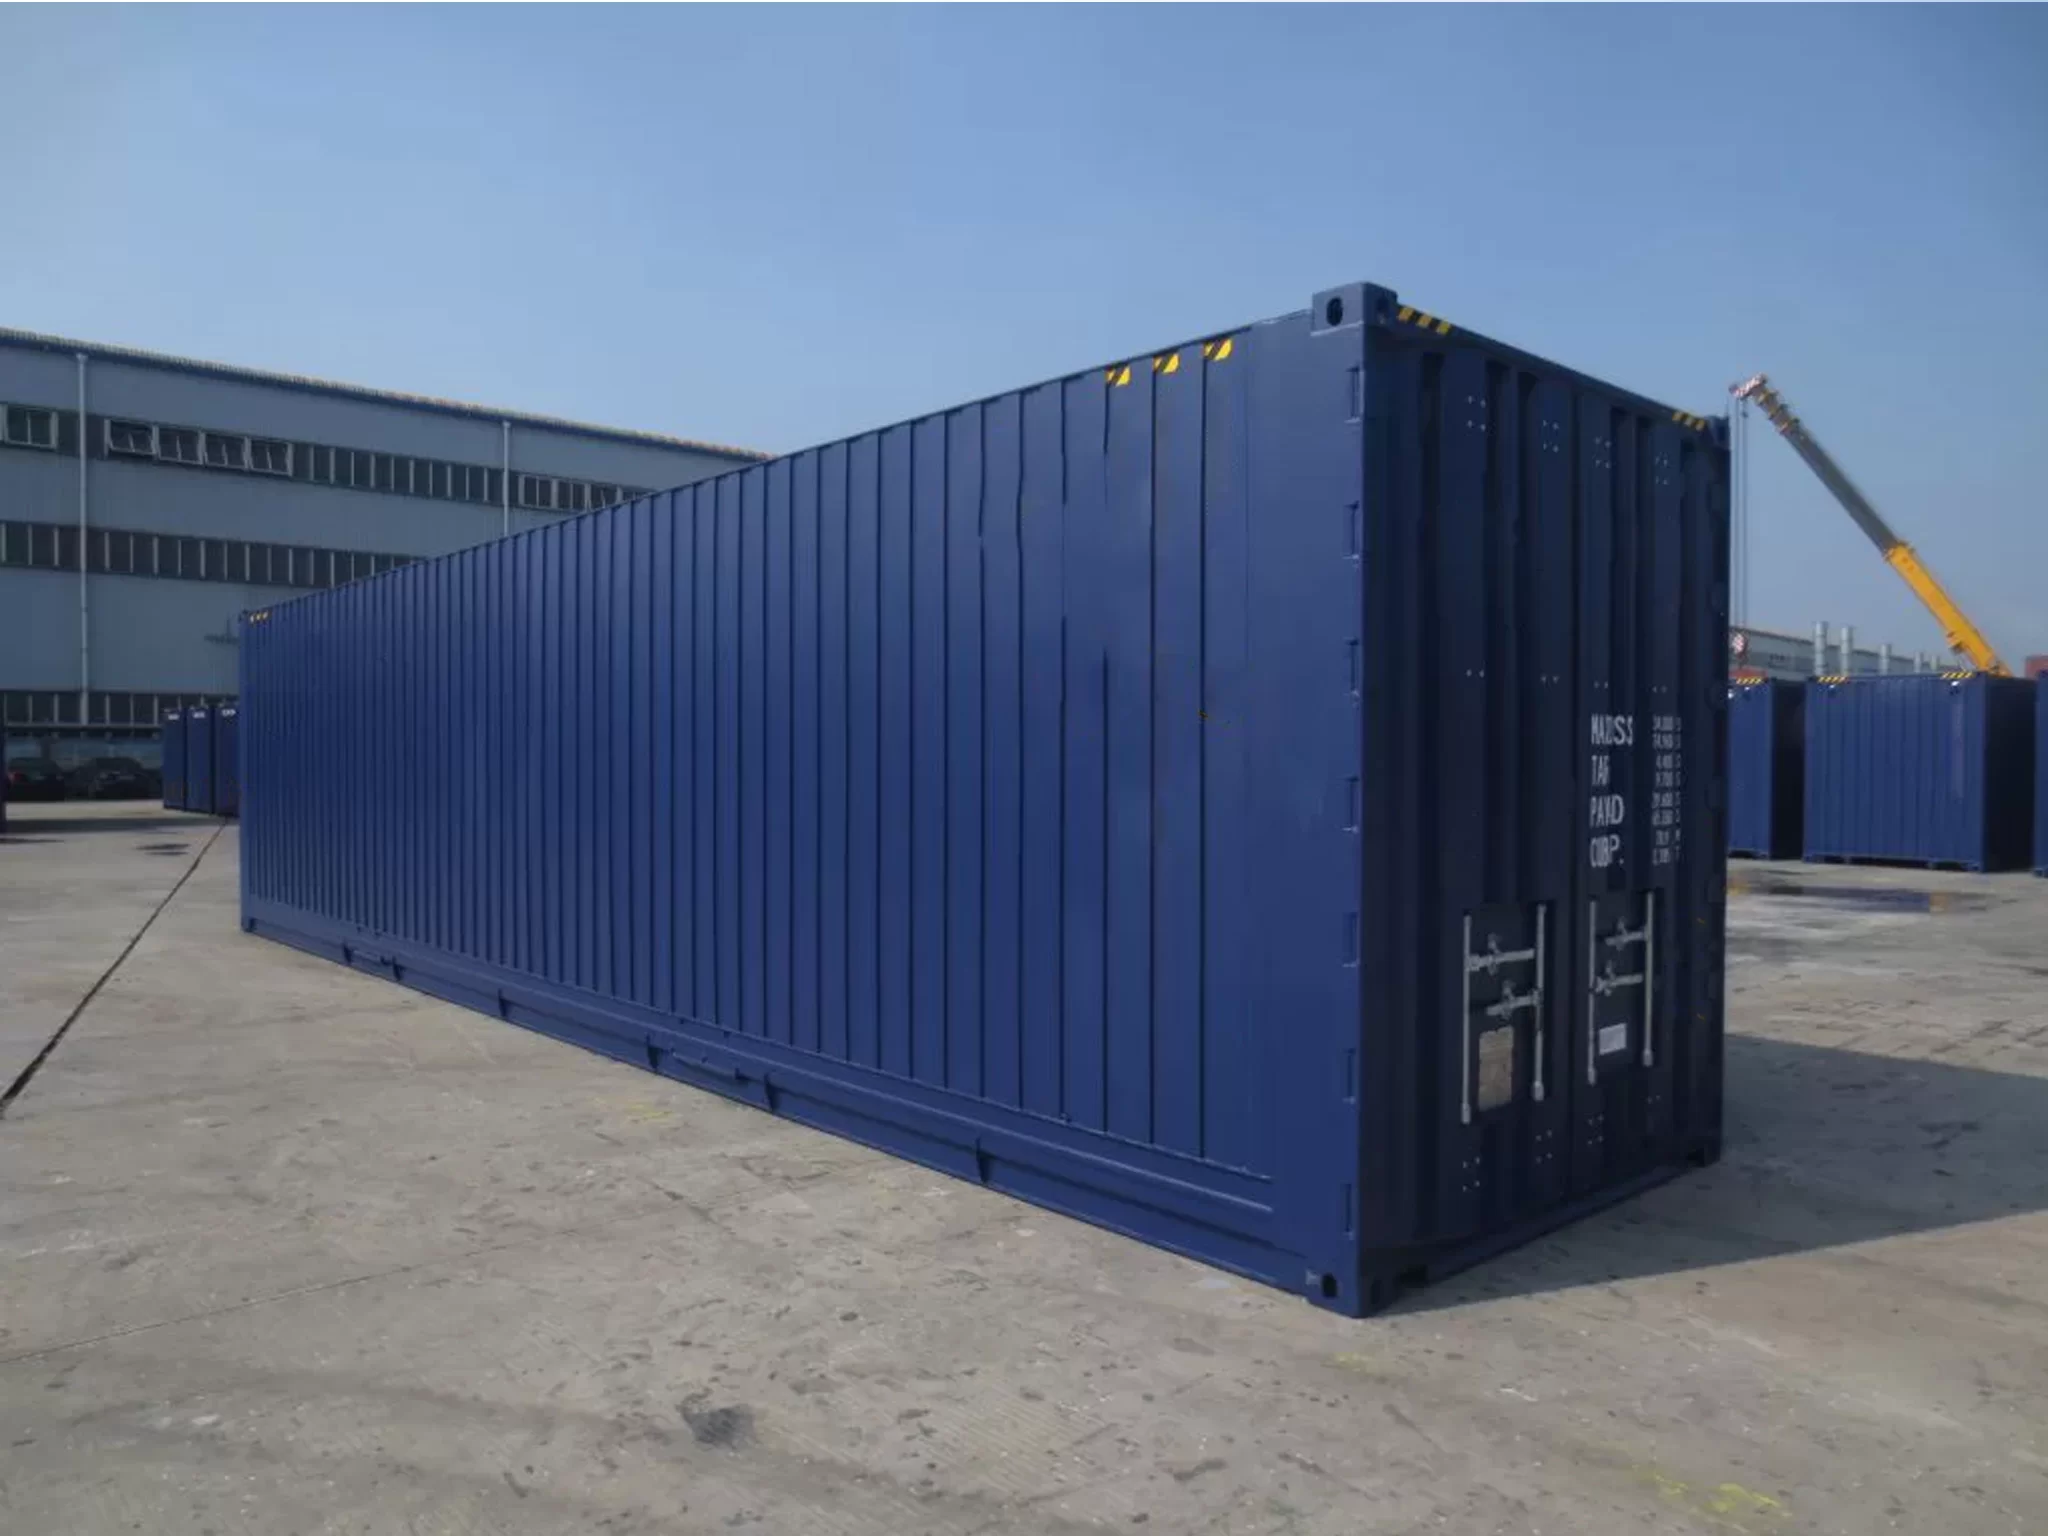 Shipping containers for sale in Everett